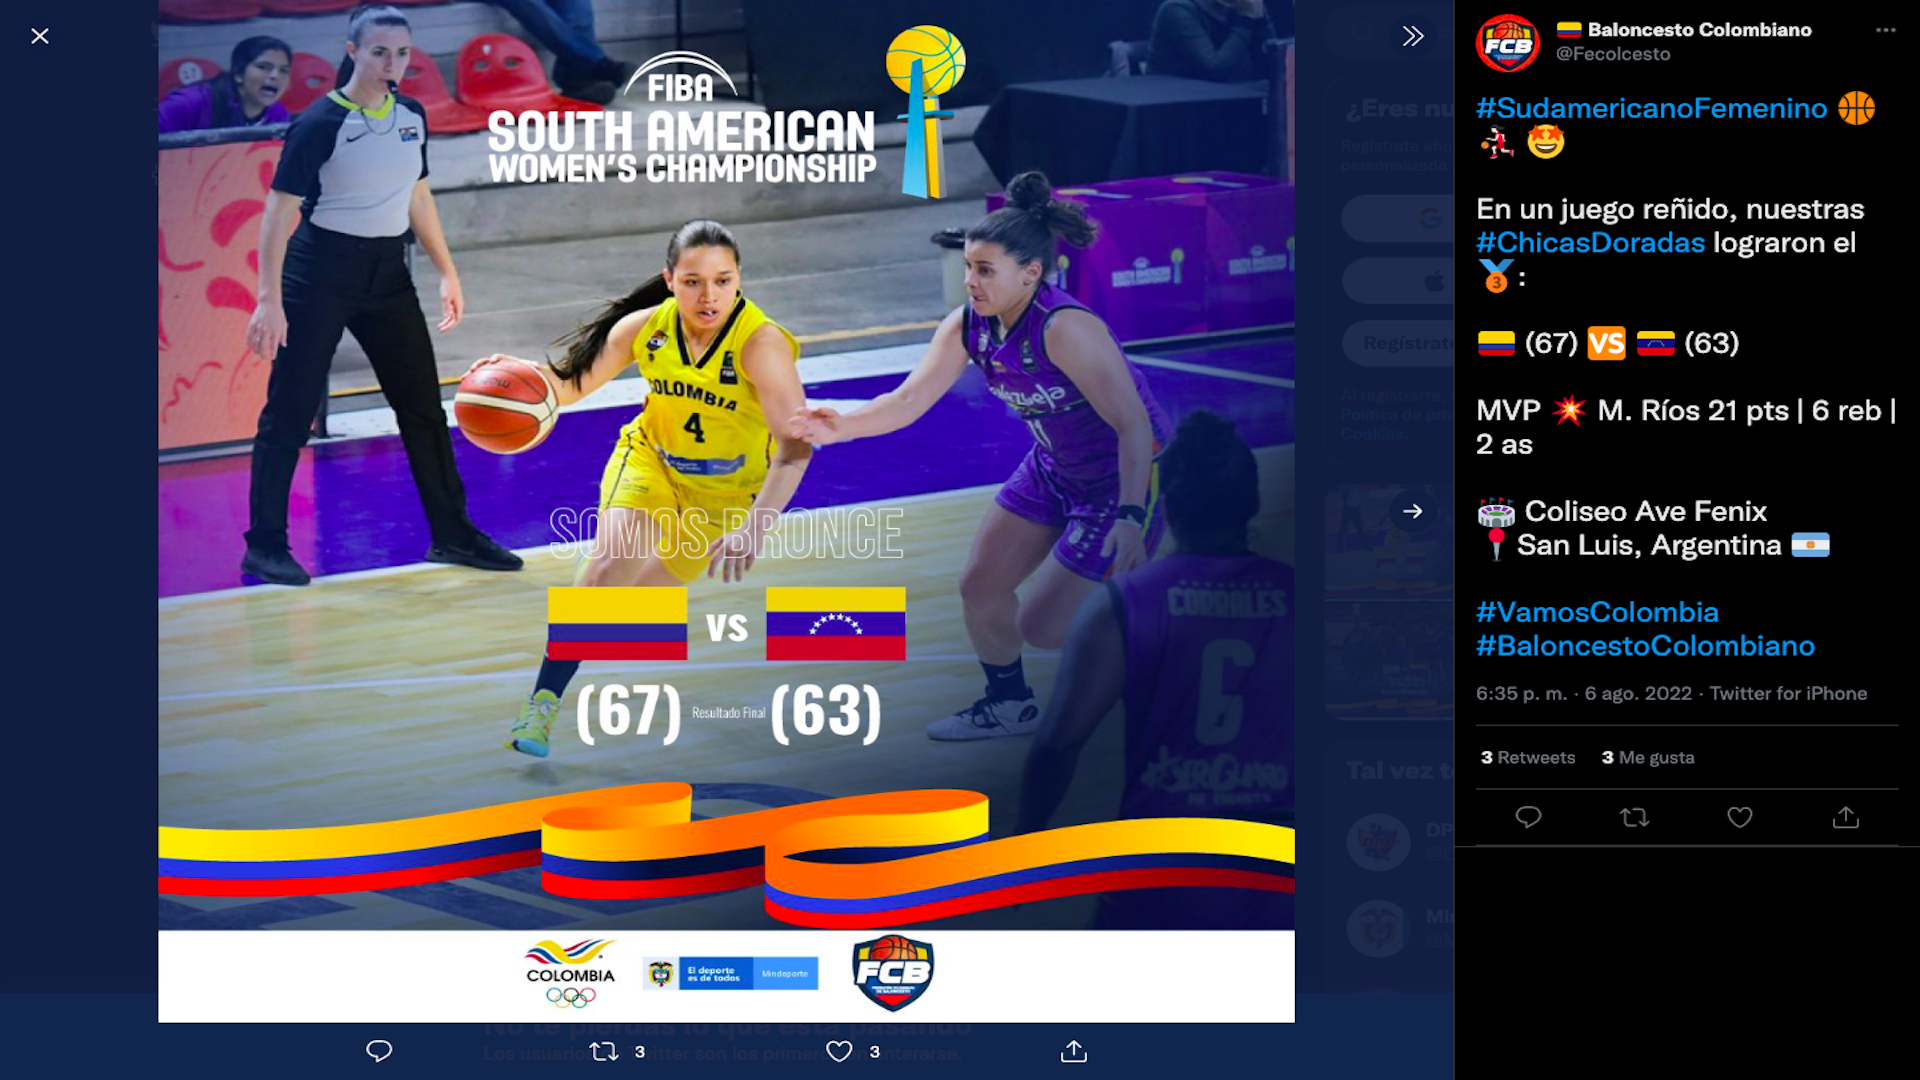 Colombia won the bronze medal at the 2022 South American Women's Basketball Championship / (Twitter: @Fecolcesto)